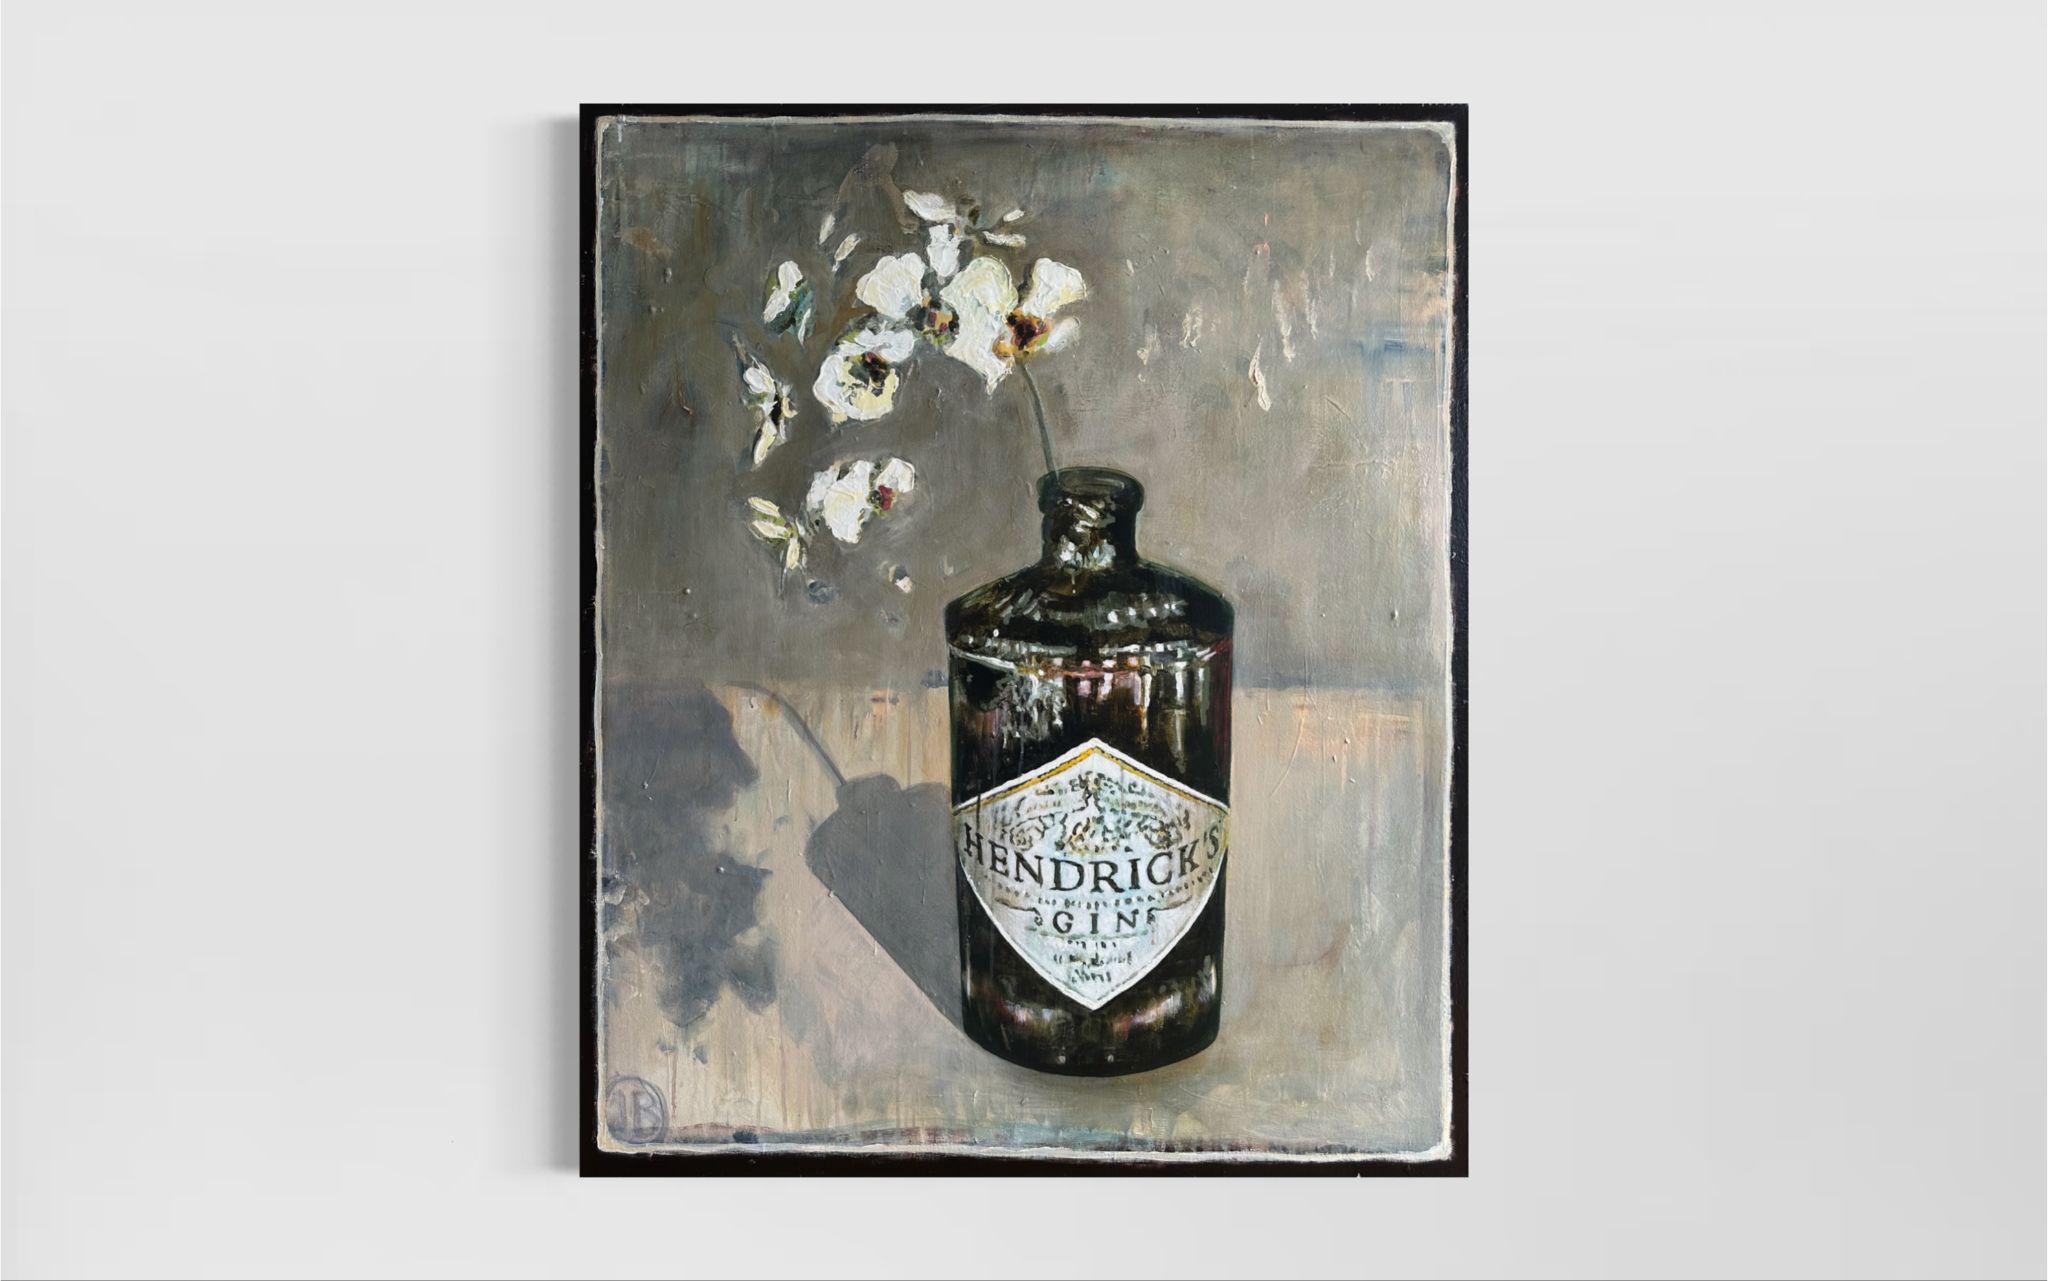 Acrylic on canvas painting of a bottle of Hendricks Gin being used to hold a sprig of white flowers.